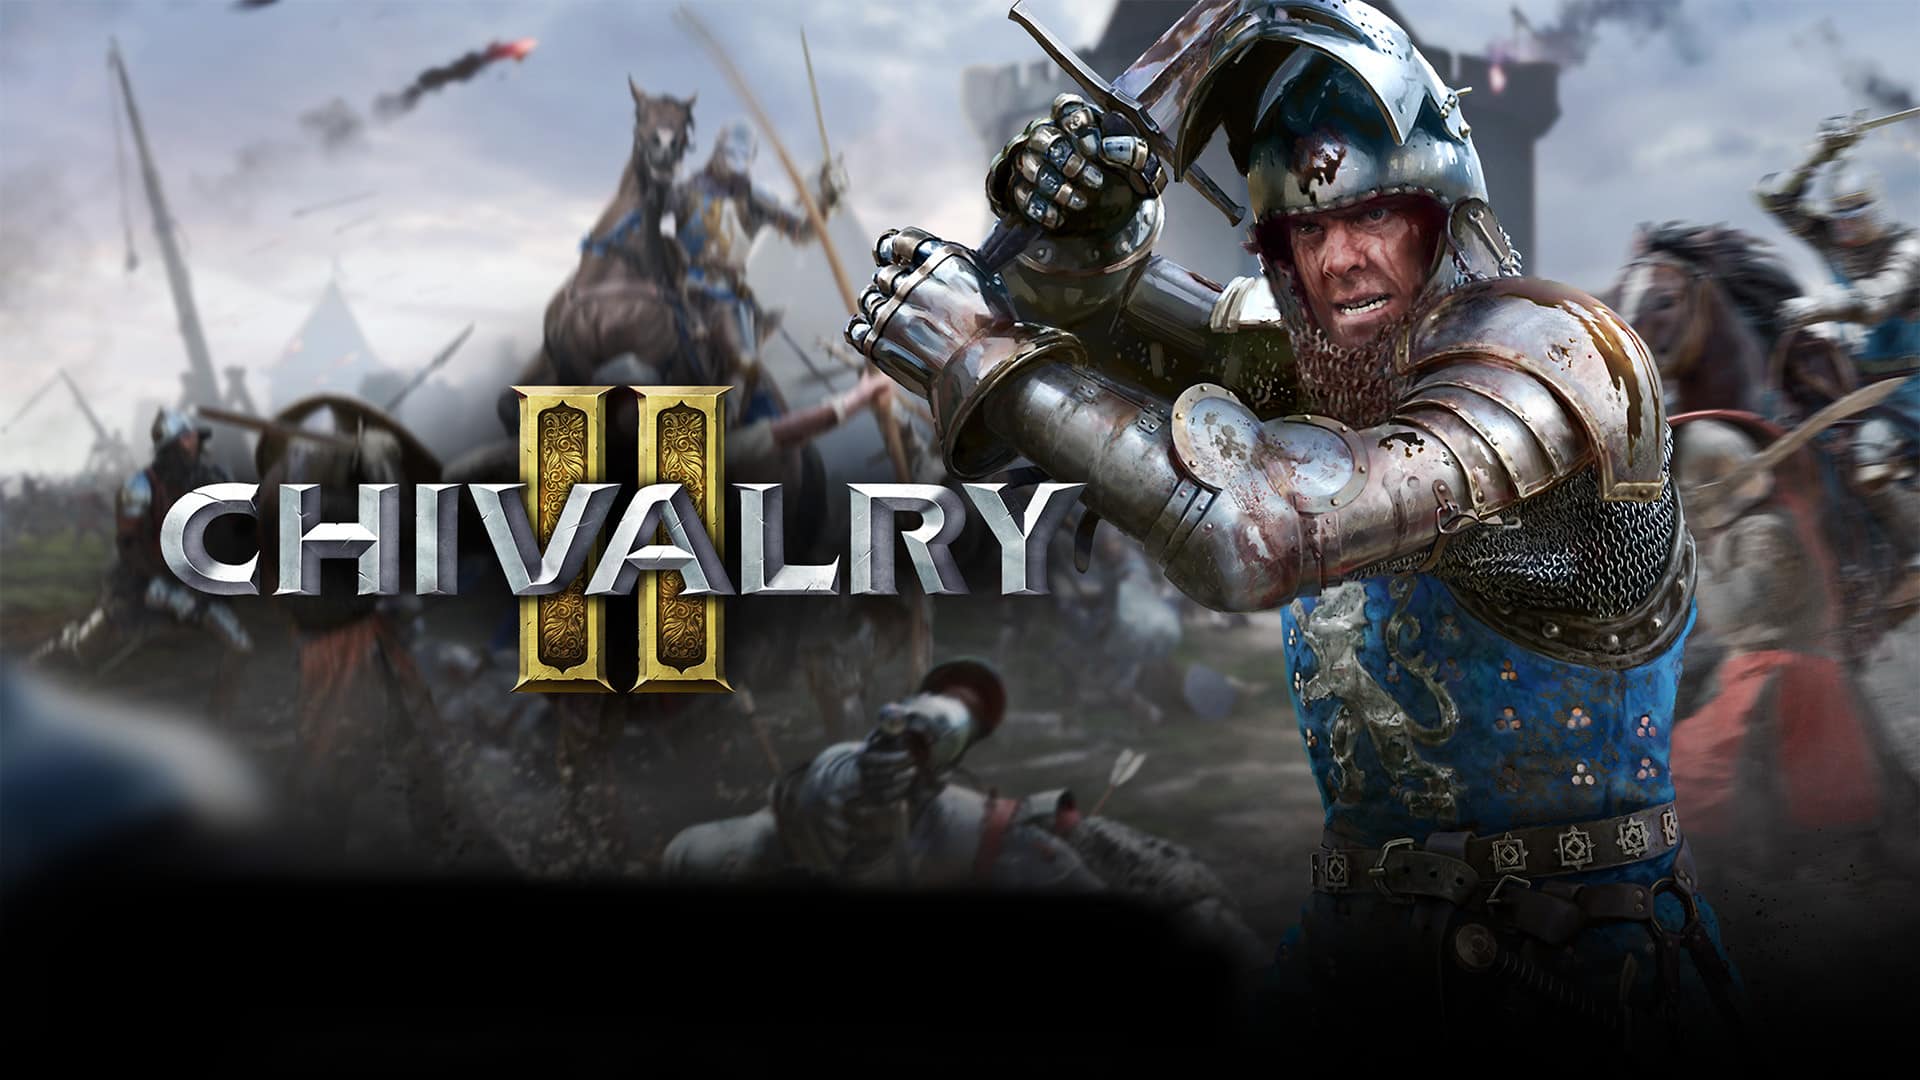 download chivalry 2 gameplay pc for free